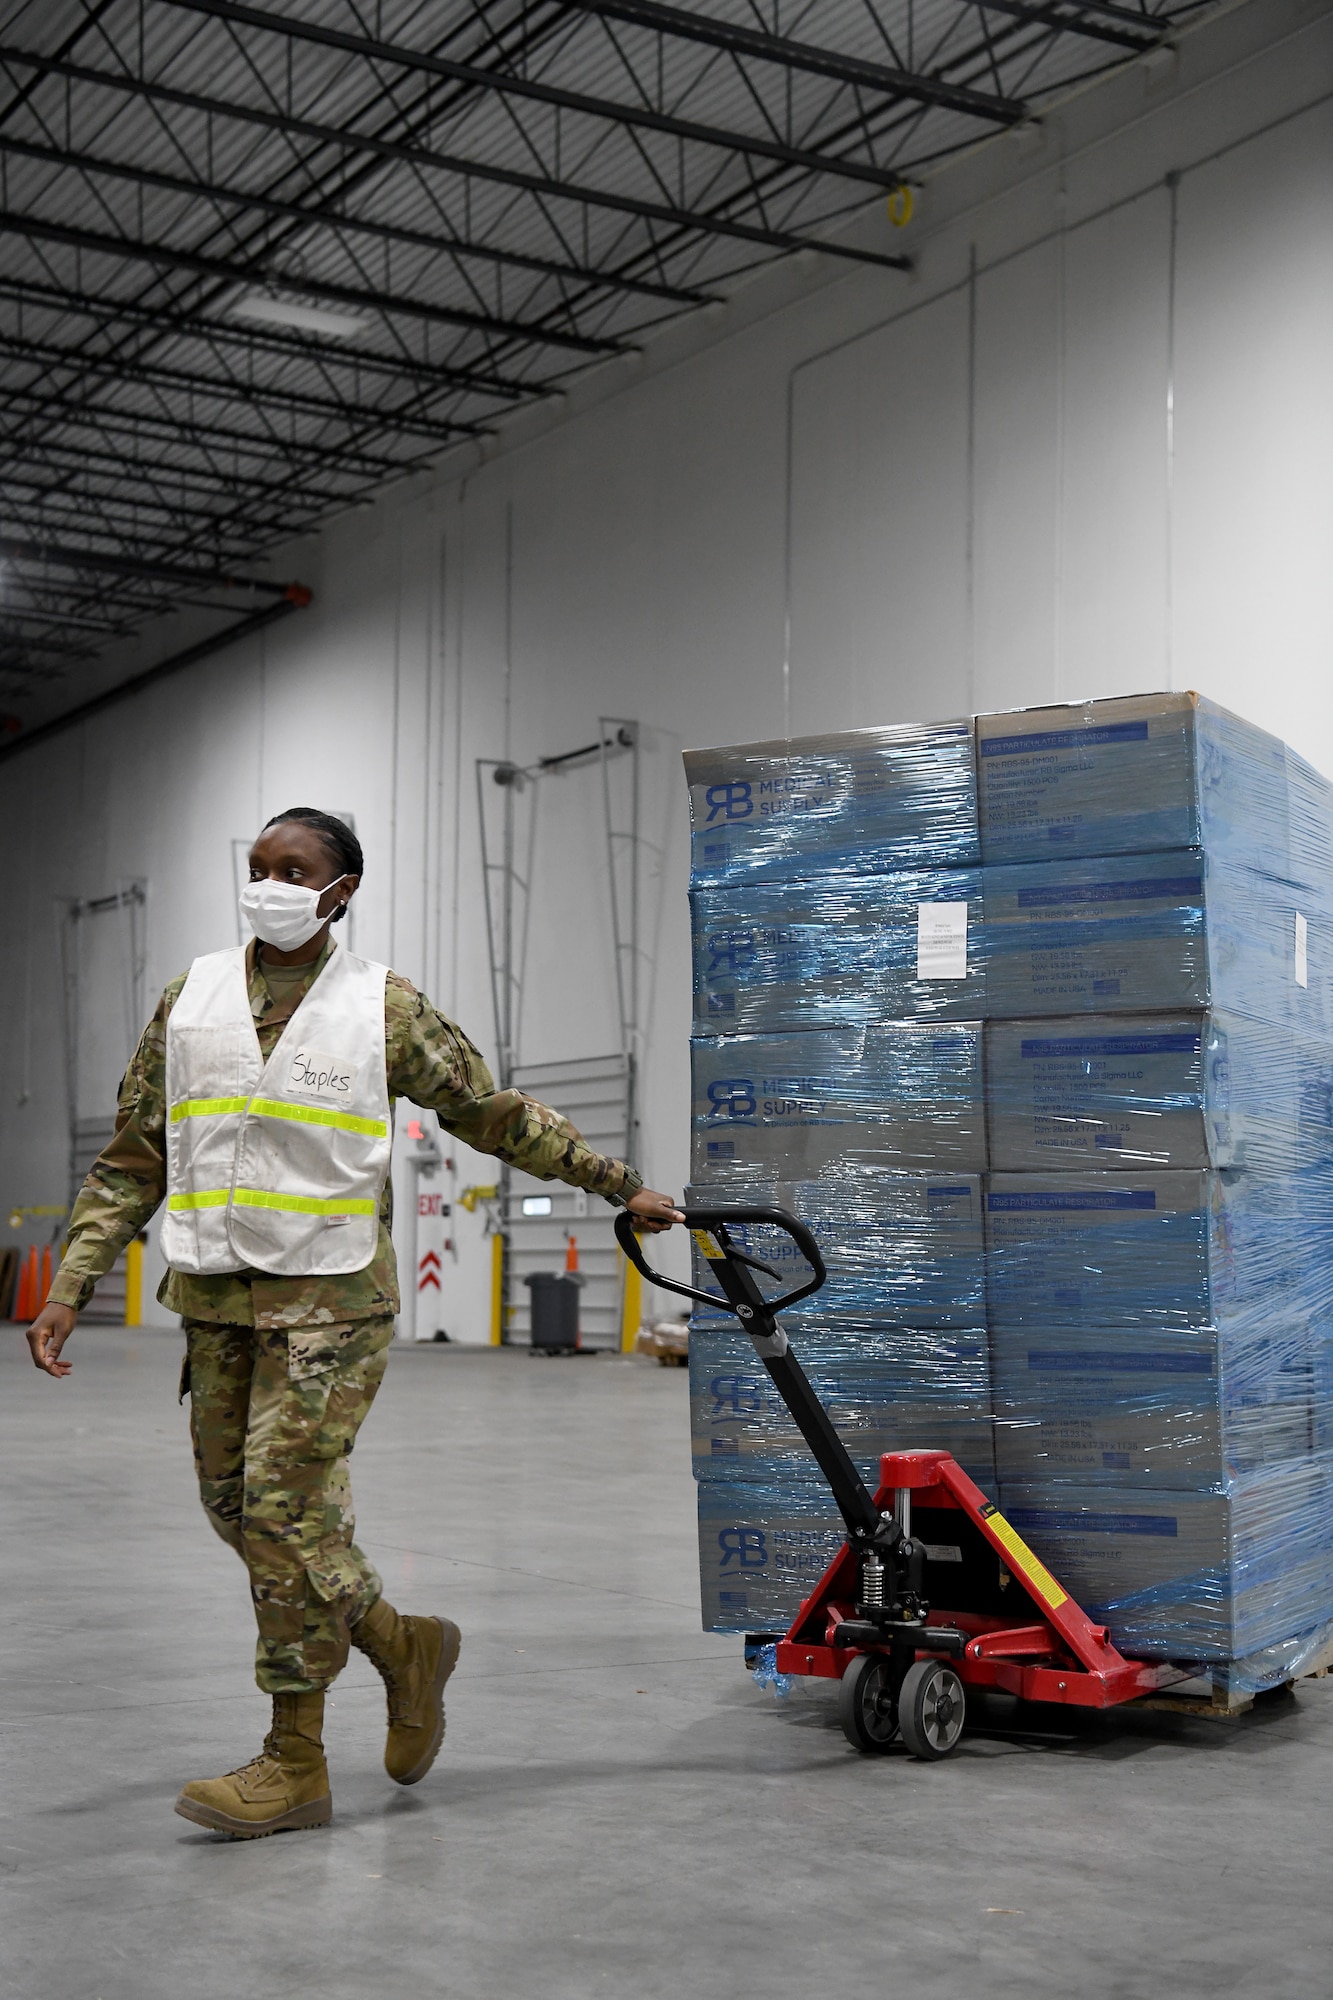 An Airman transports a pallet of medical supplies in a warehouse.